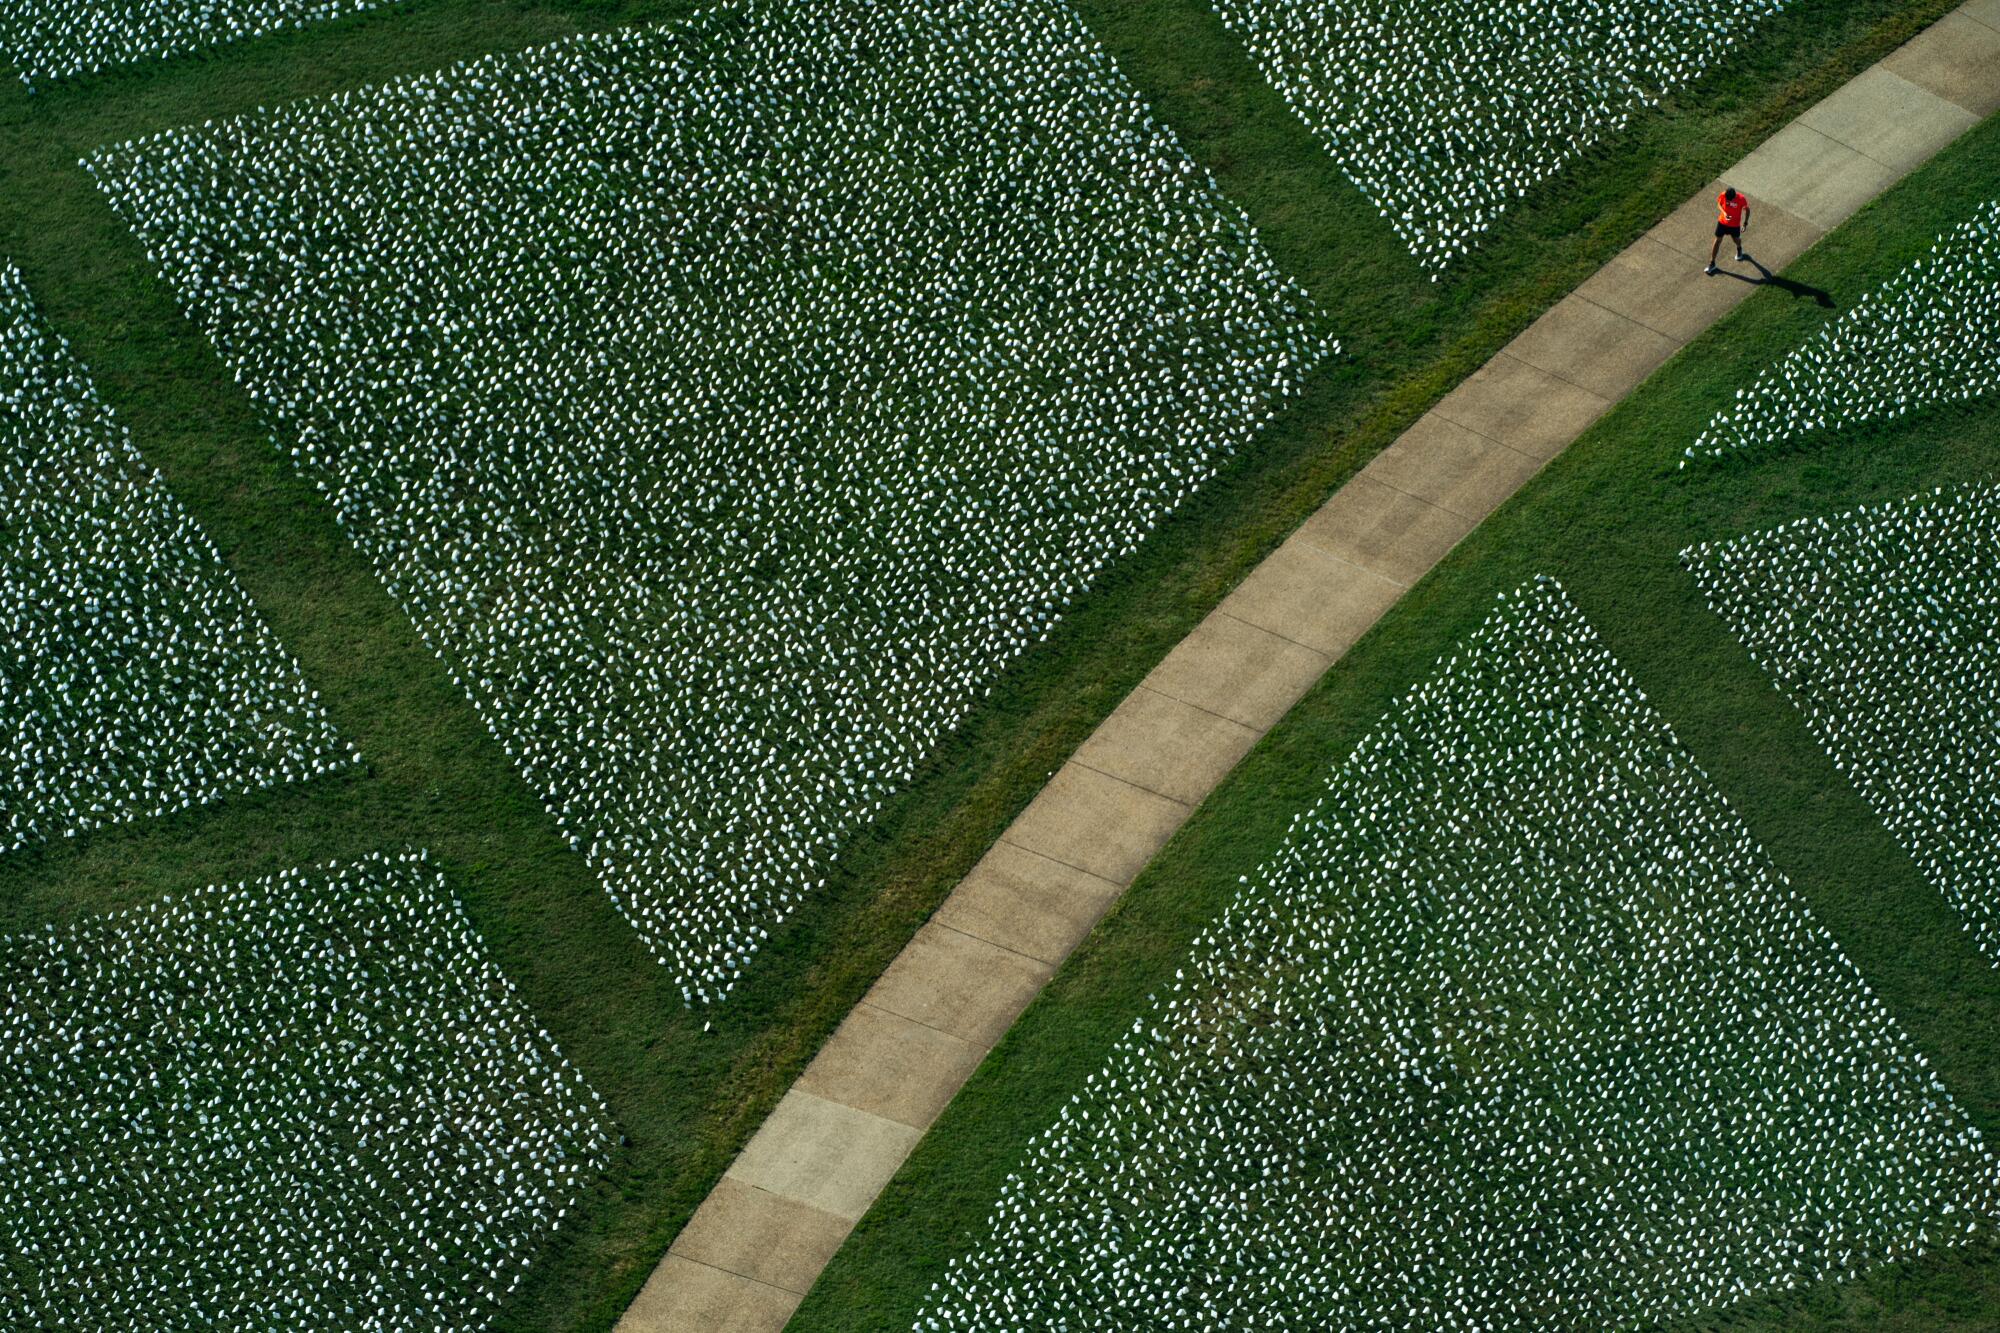 Aerial view of someone walking on a pathway between blocks of white flags planted in the grass